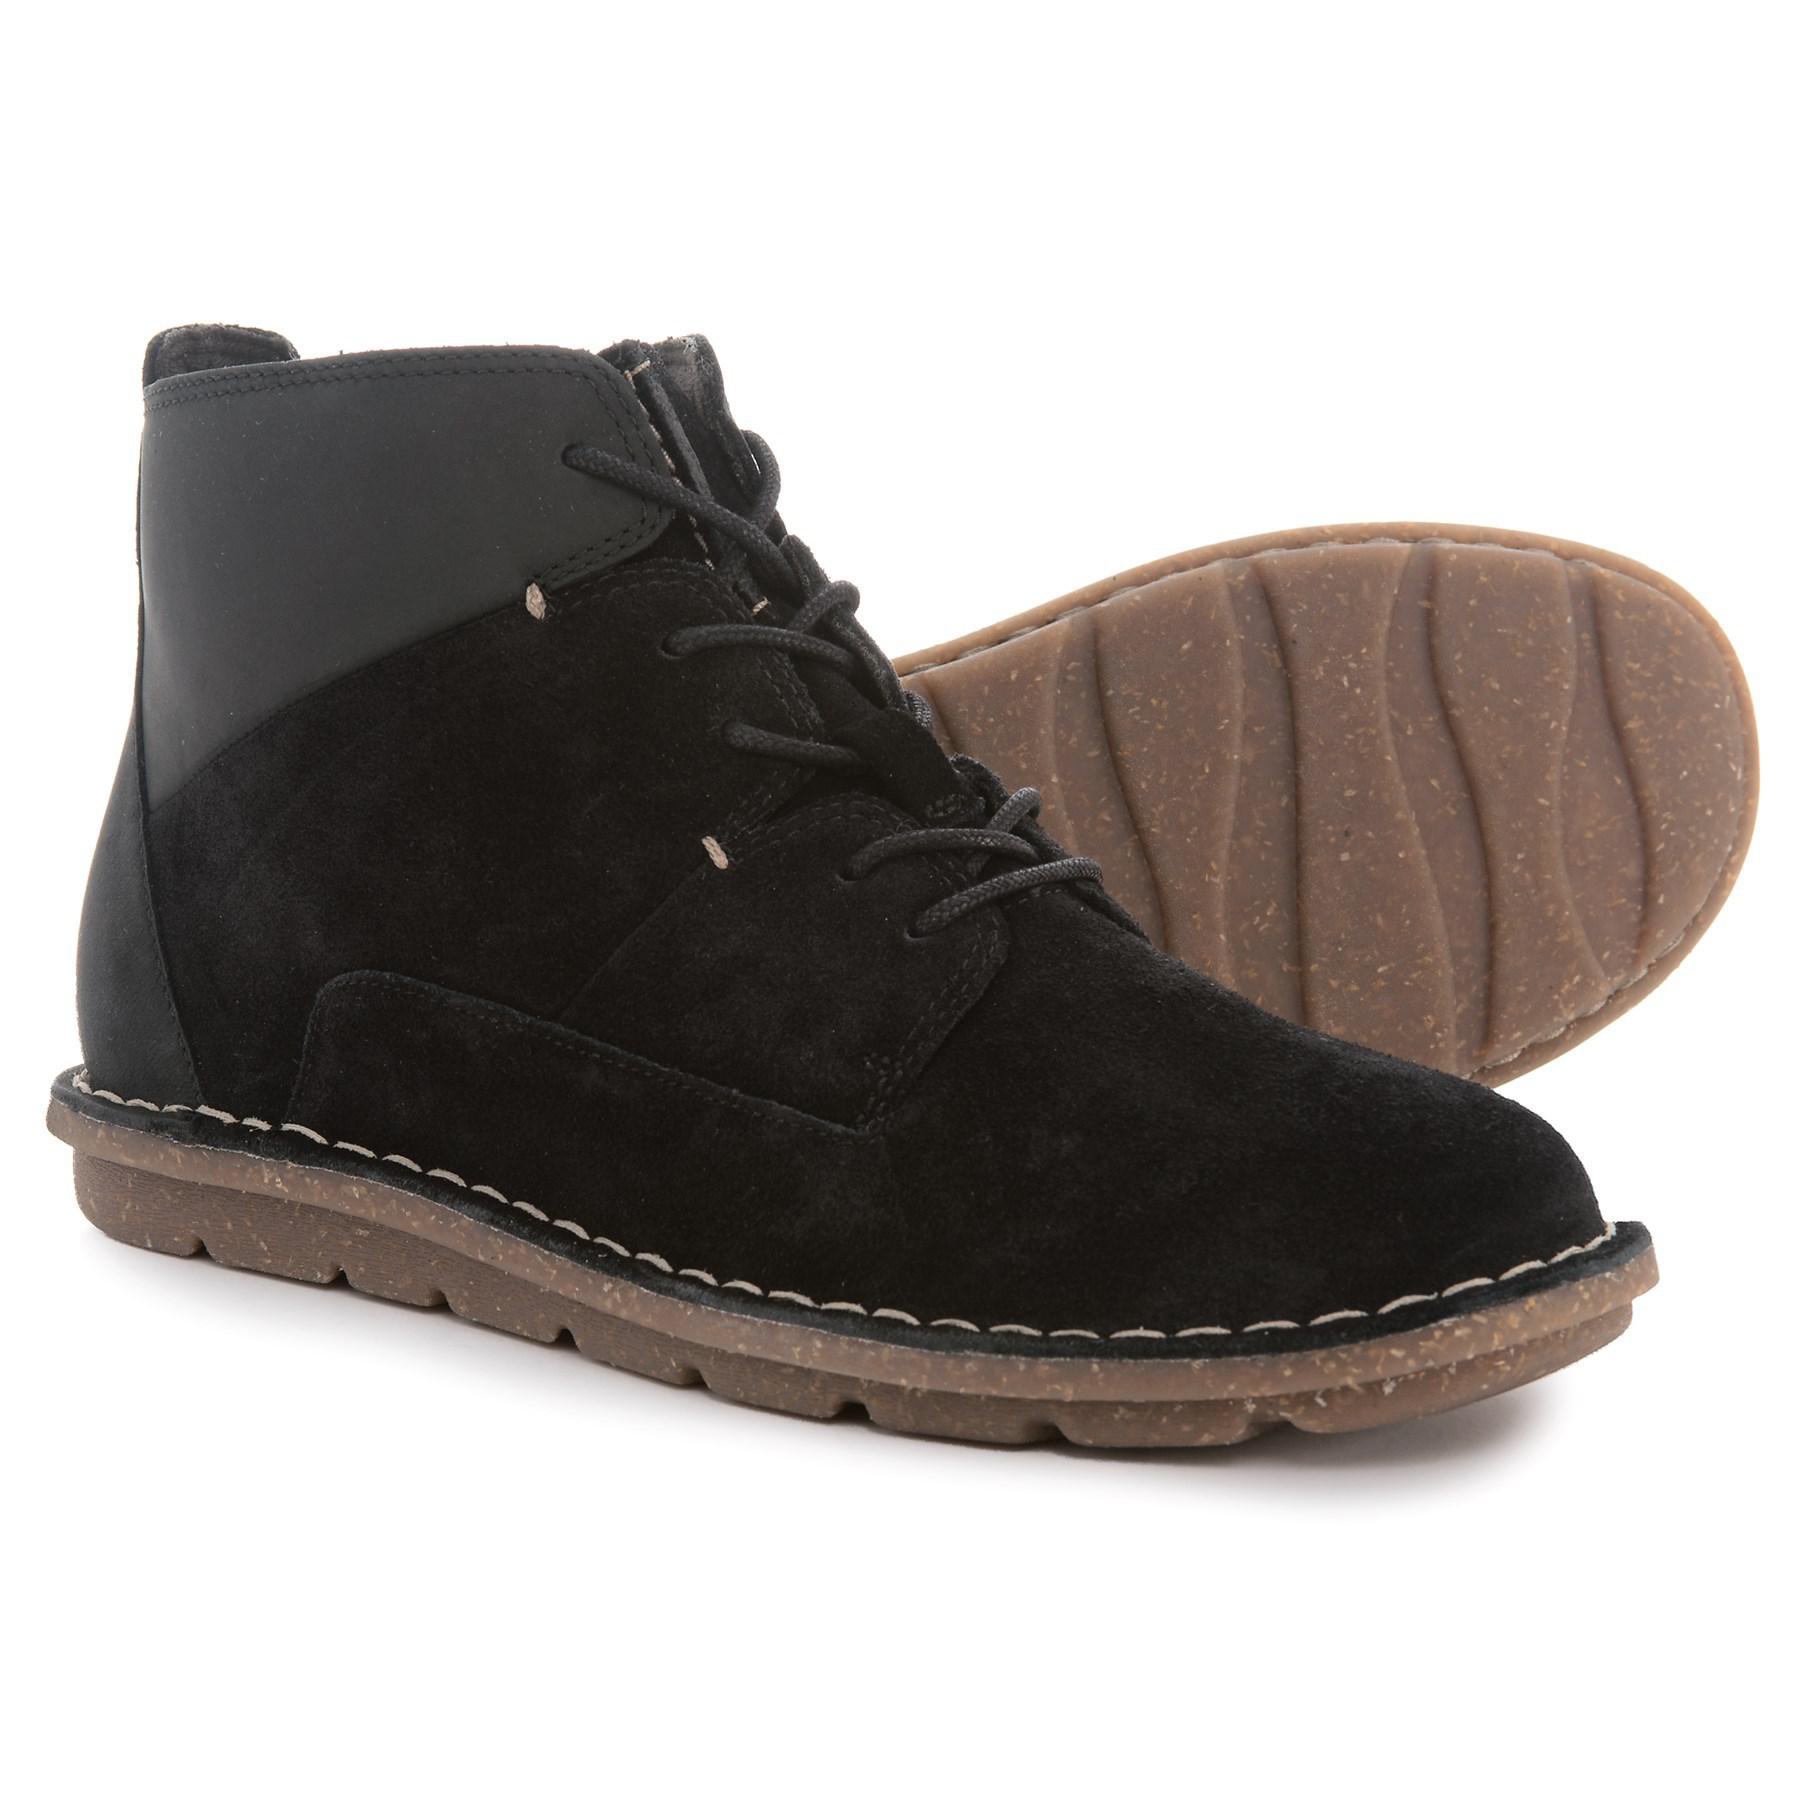 Clarks Leather Tamitha Key Low Boots in Black - Lyst